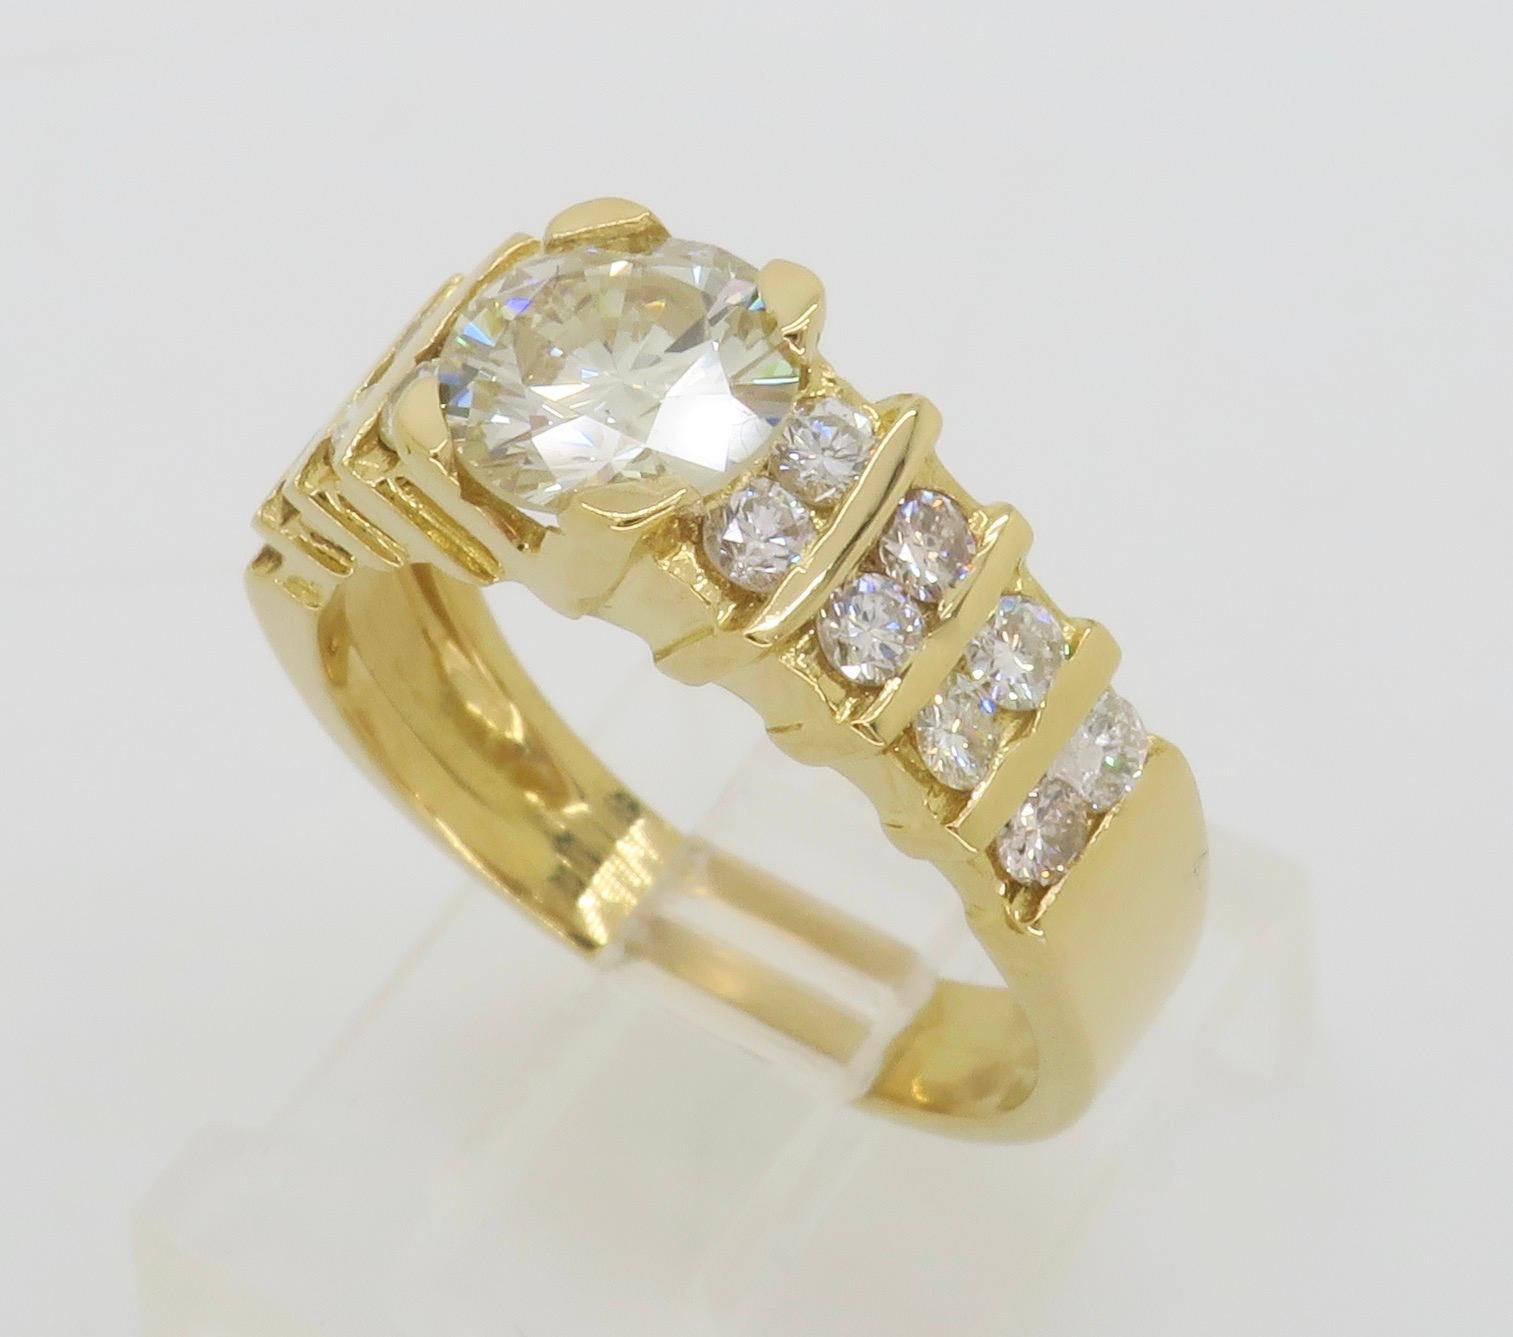 1.54ctw Diamond Encrusted Ring in 14k Yellow Gold For Sale 7